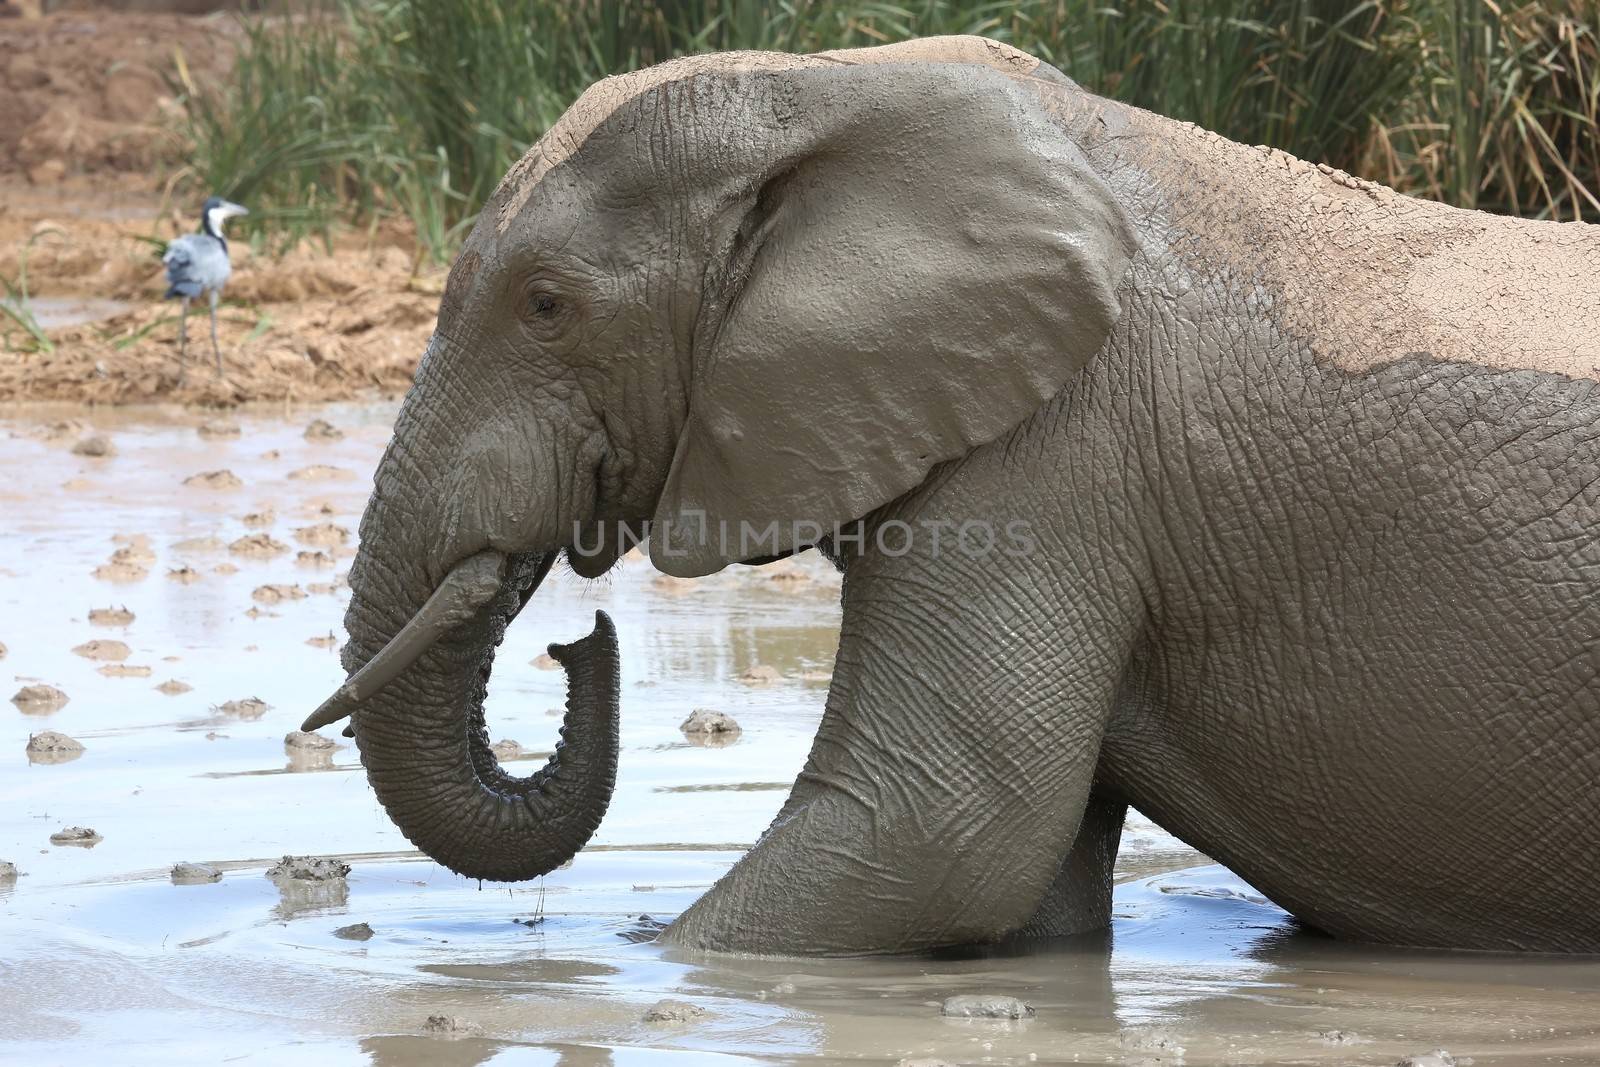 African elephant cooling off in muddy water